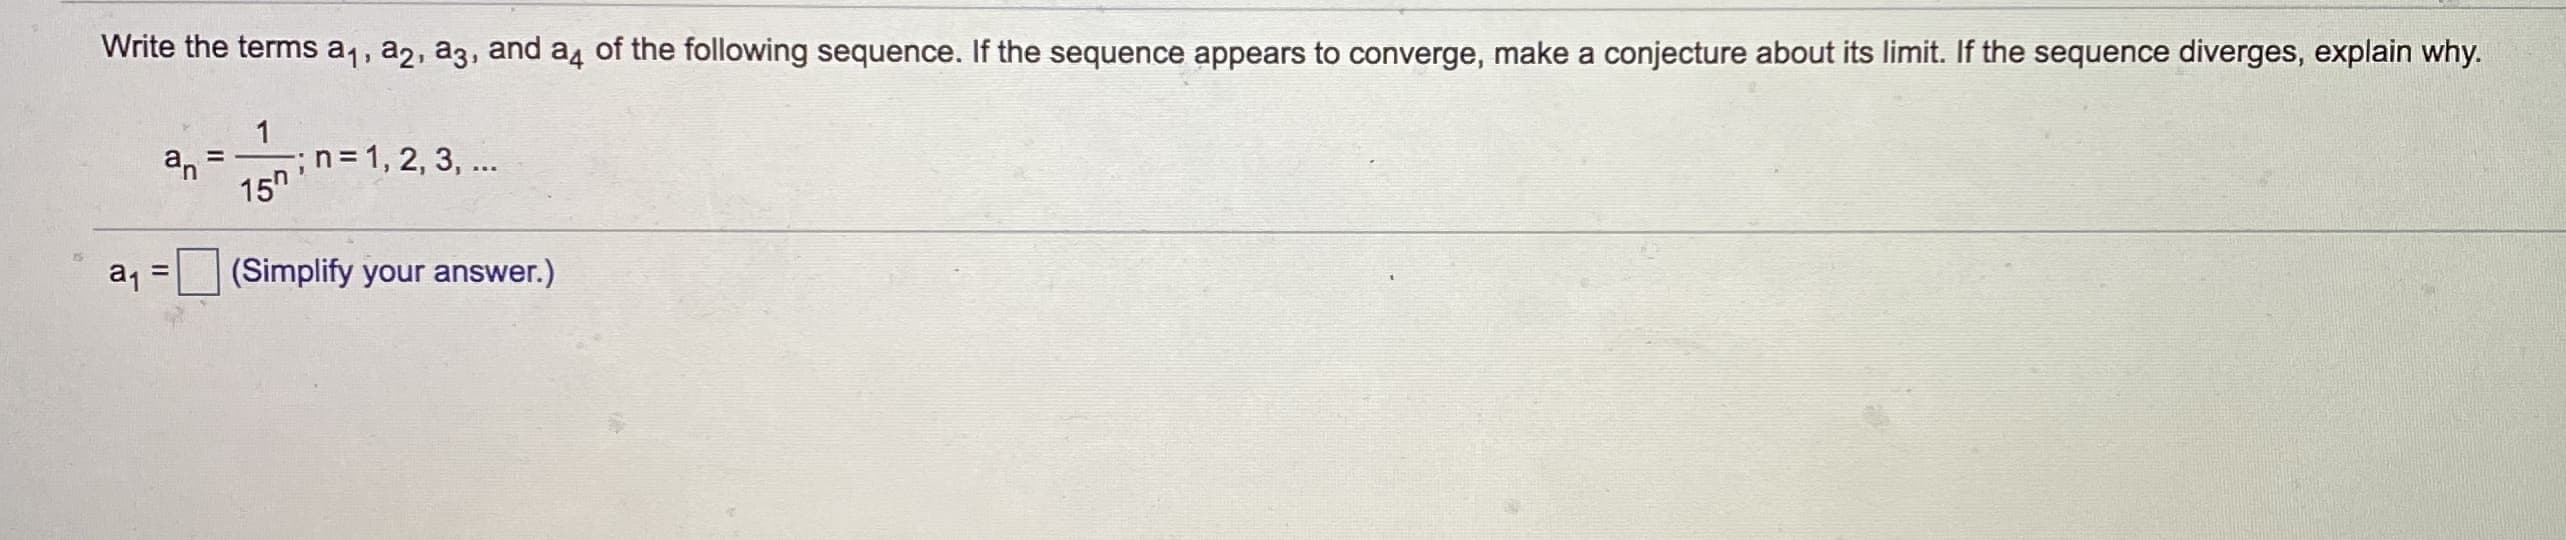 Write the terms a1, a2, a3, and a4 of the following sequence. If the sequence appears to converge, make a conjecture about its limit. If the sequence diverges, explain why.
1
;n=D1, 2, 3, ...
15"
%3D
an
a, =
(Simplify your answer.)
